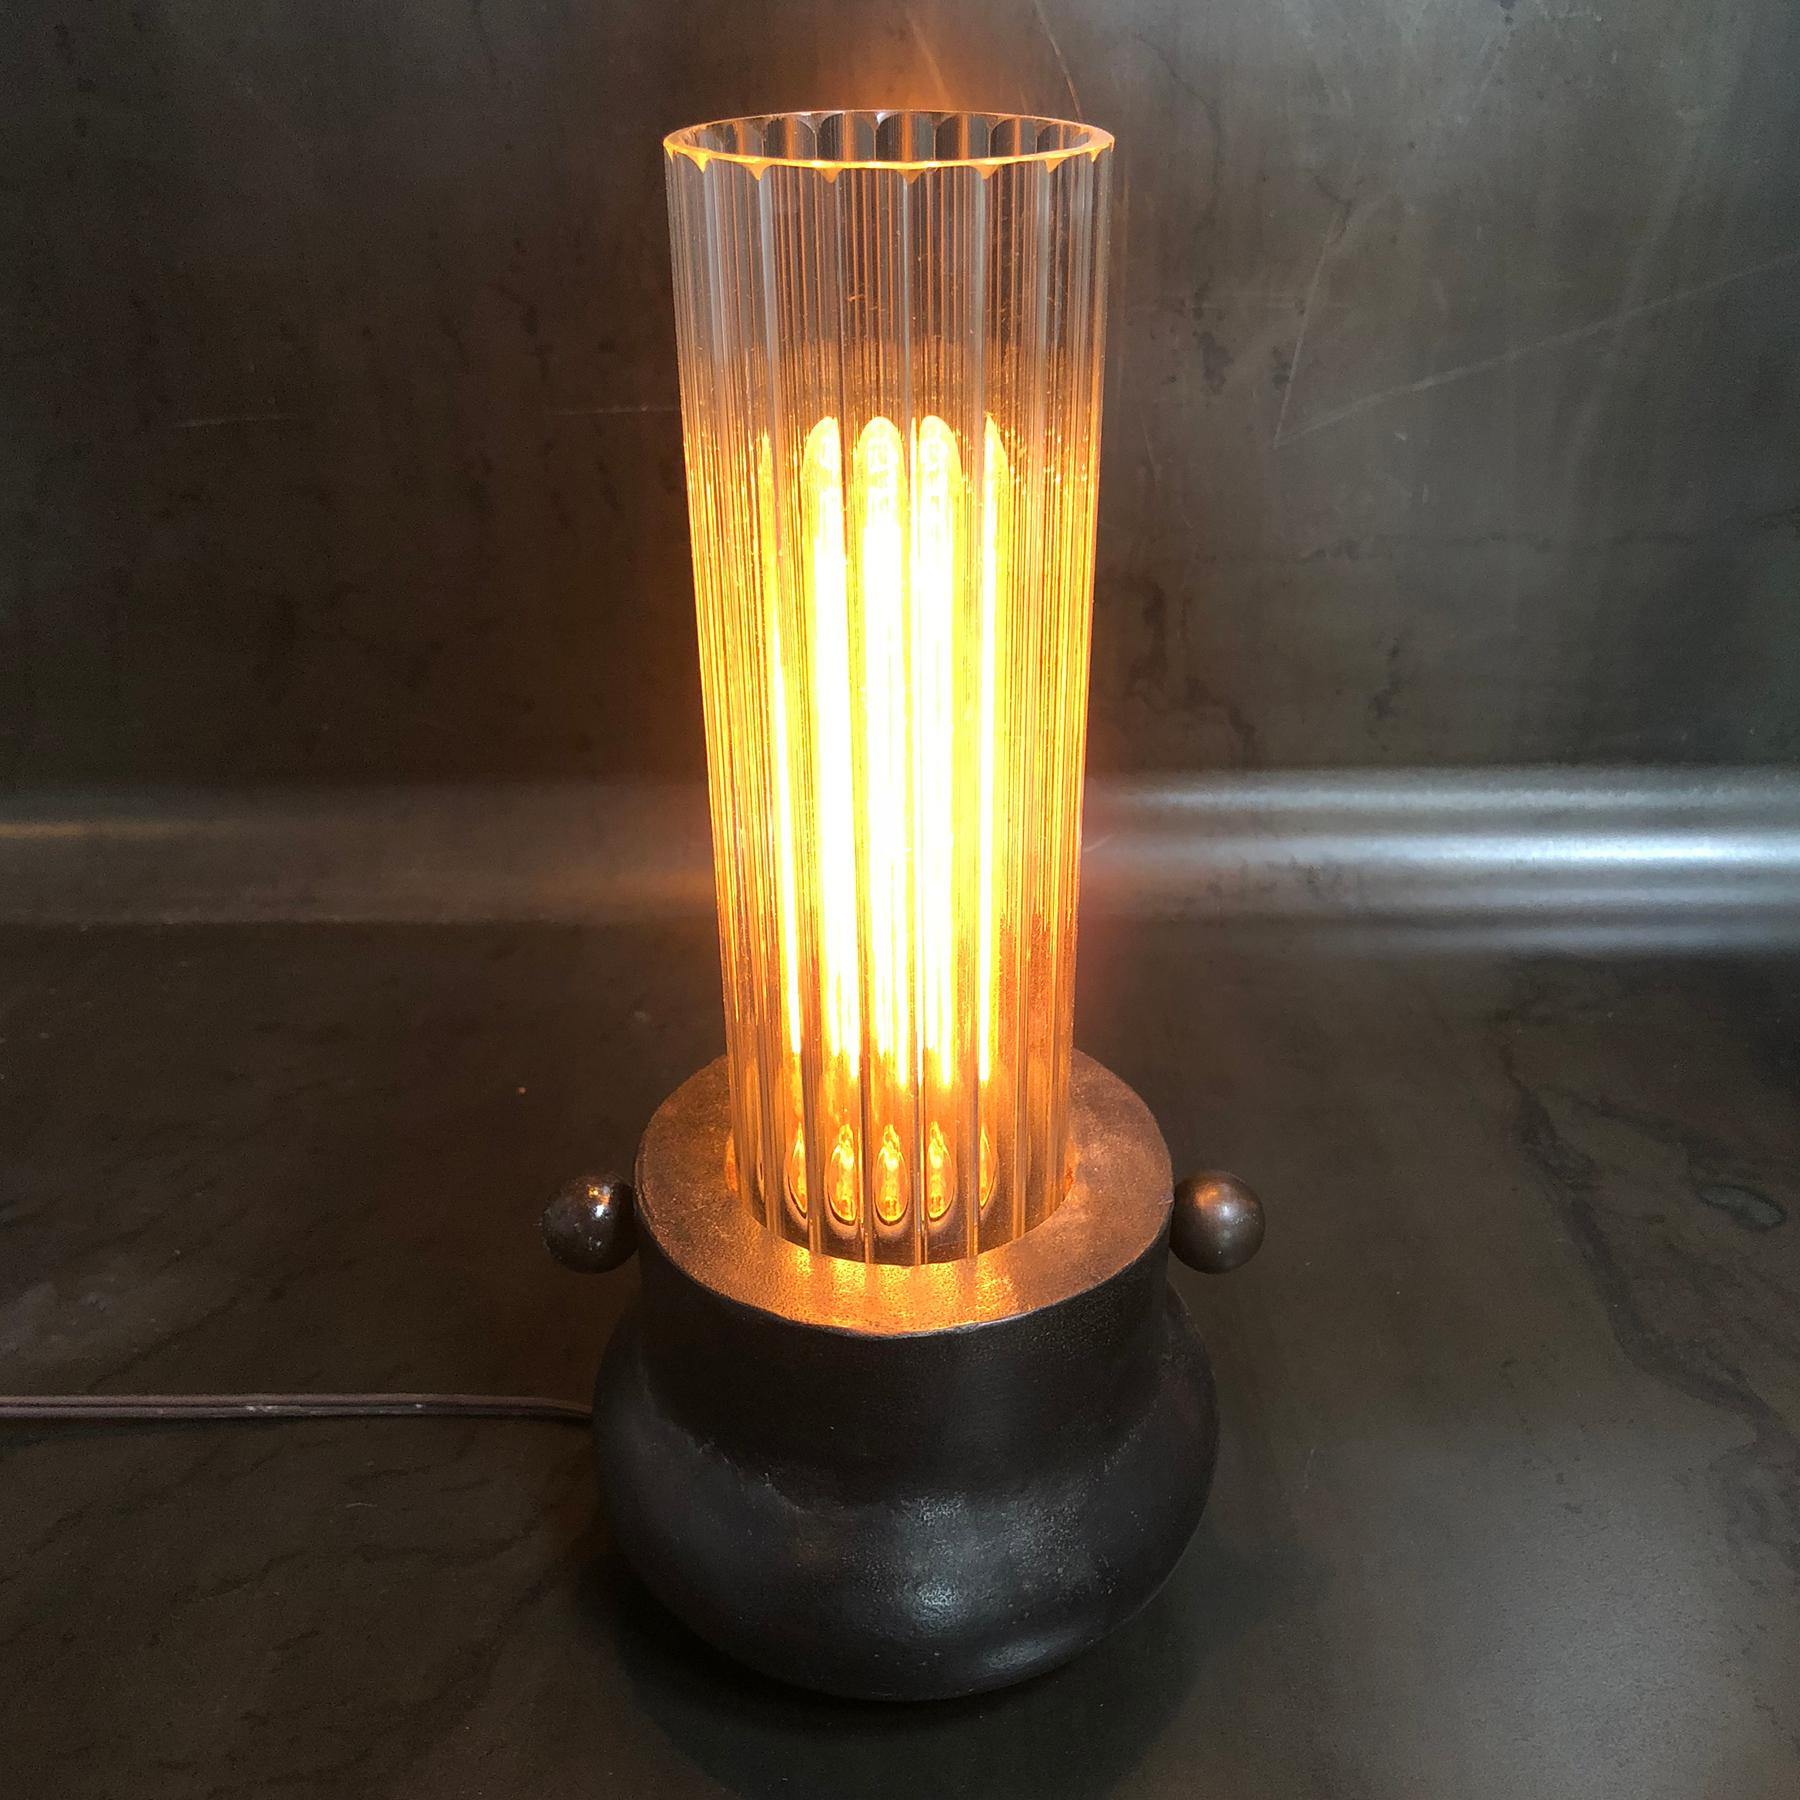 Jordan Mozer (b.1958) : Victory Boudoir Lamp, Cast Aluminum + Fluted Glass Tube, Made in Chicago, USA, 2013. Provenance: collection of the artist. Signed. 
Measurements: 5.5” diameter x 12” tall (14 cm diameter x 30.5  cm tall)

.MATERIALS +